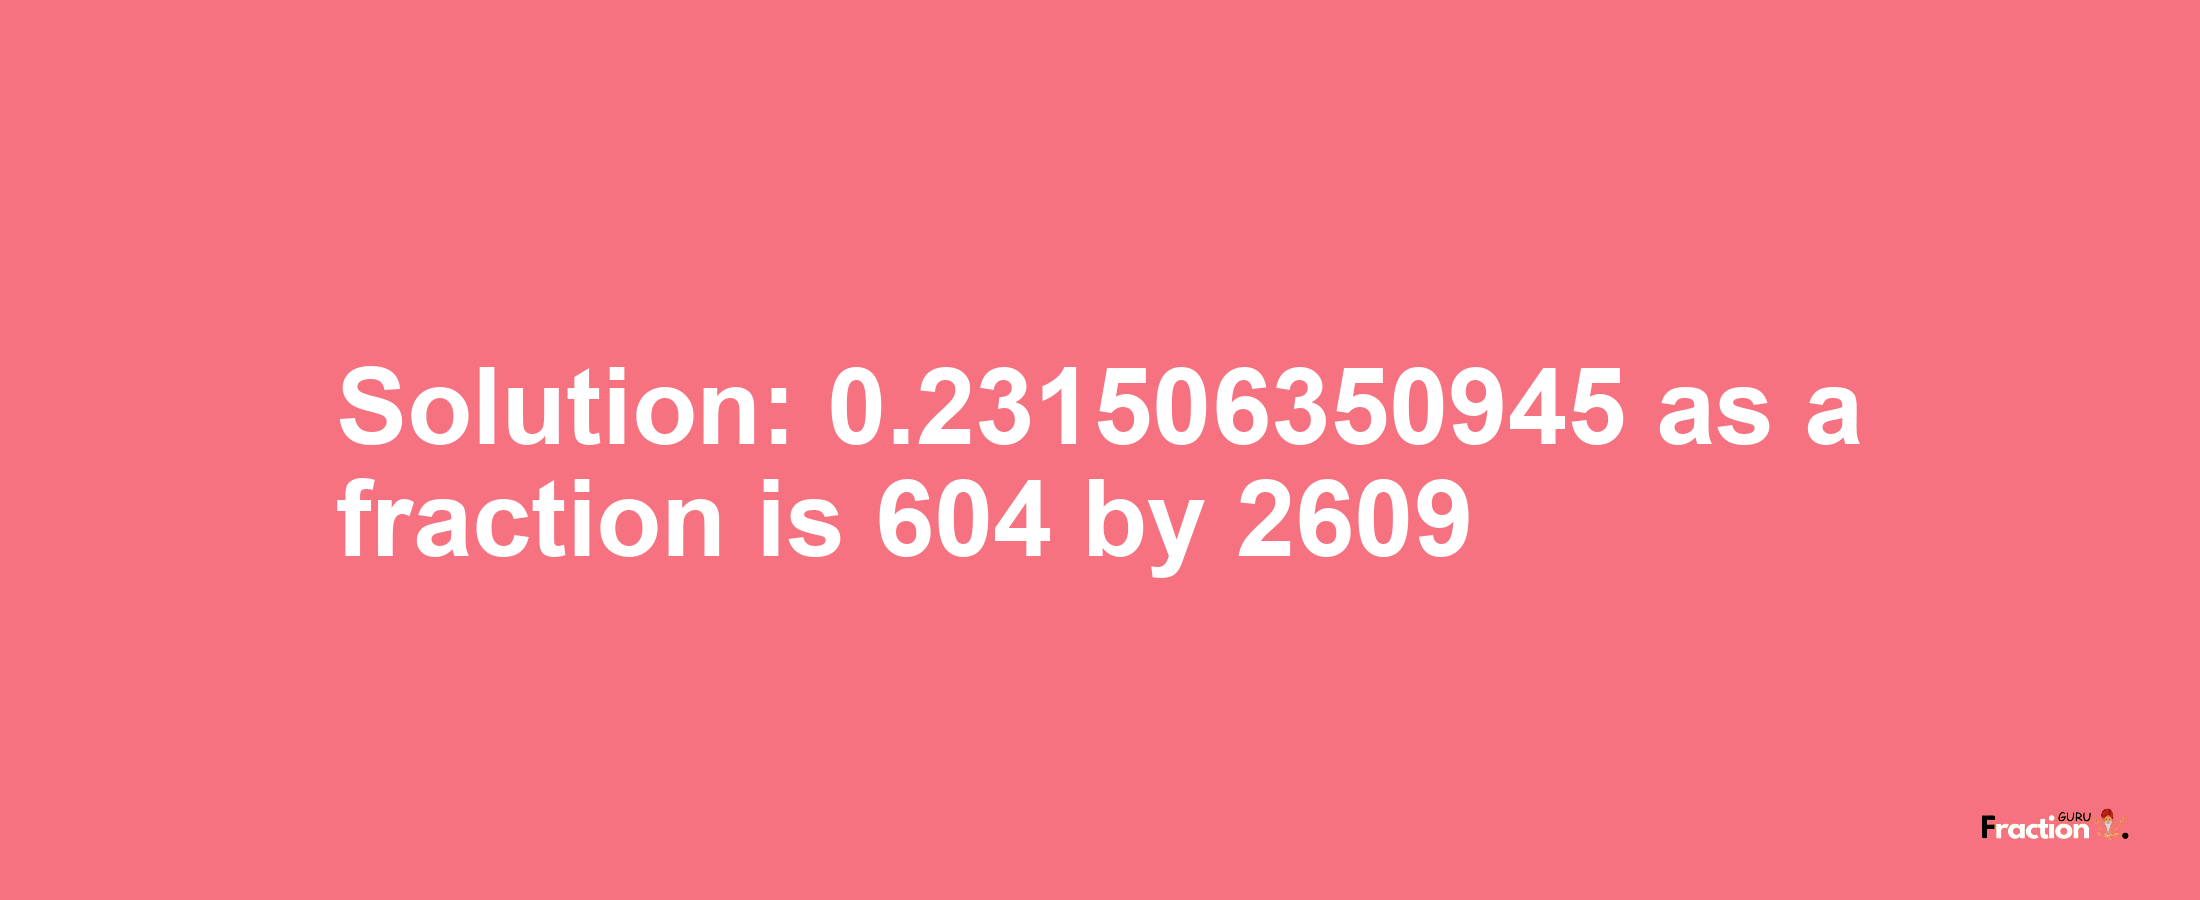 Solution:0.231506350945 as a fraction is 604/2609